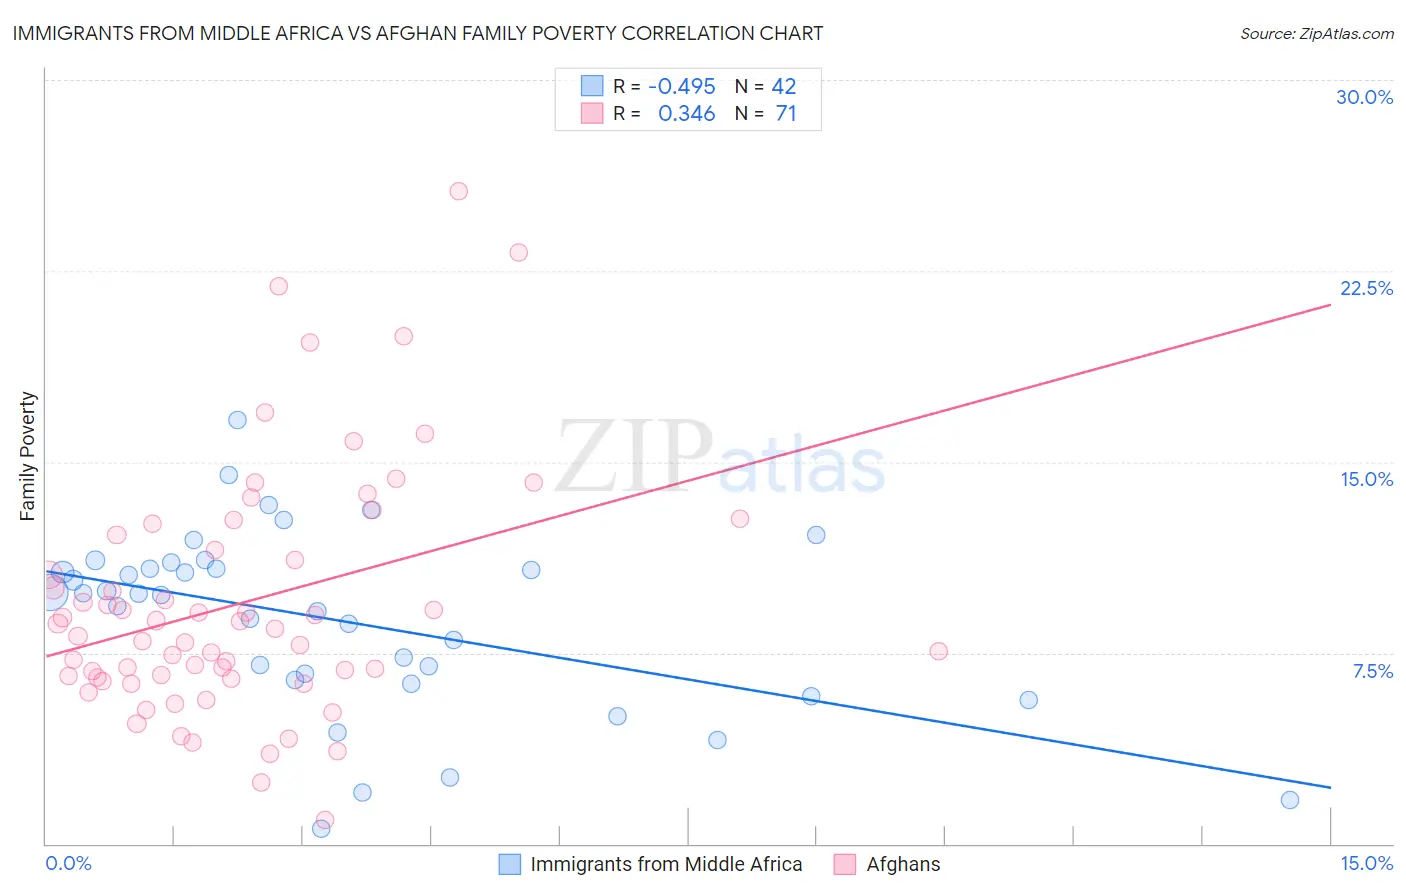 Immigrants from Middle Africa vs Afghan Family Poverty